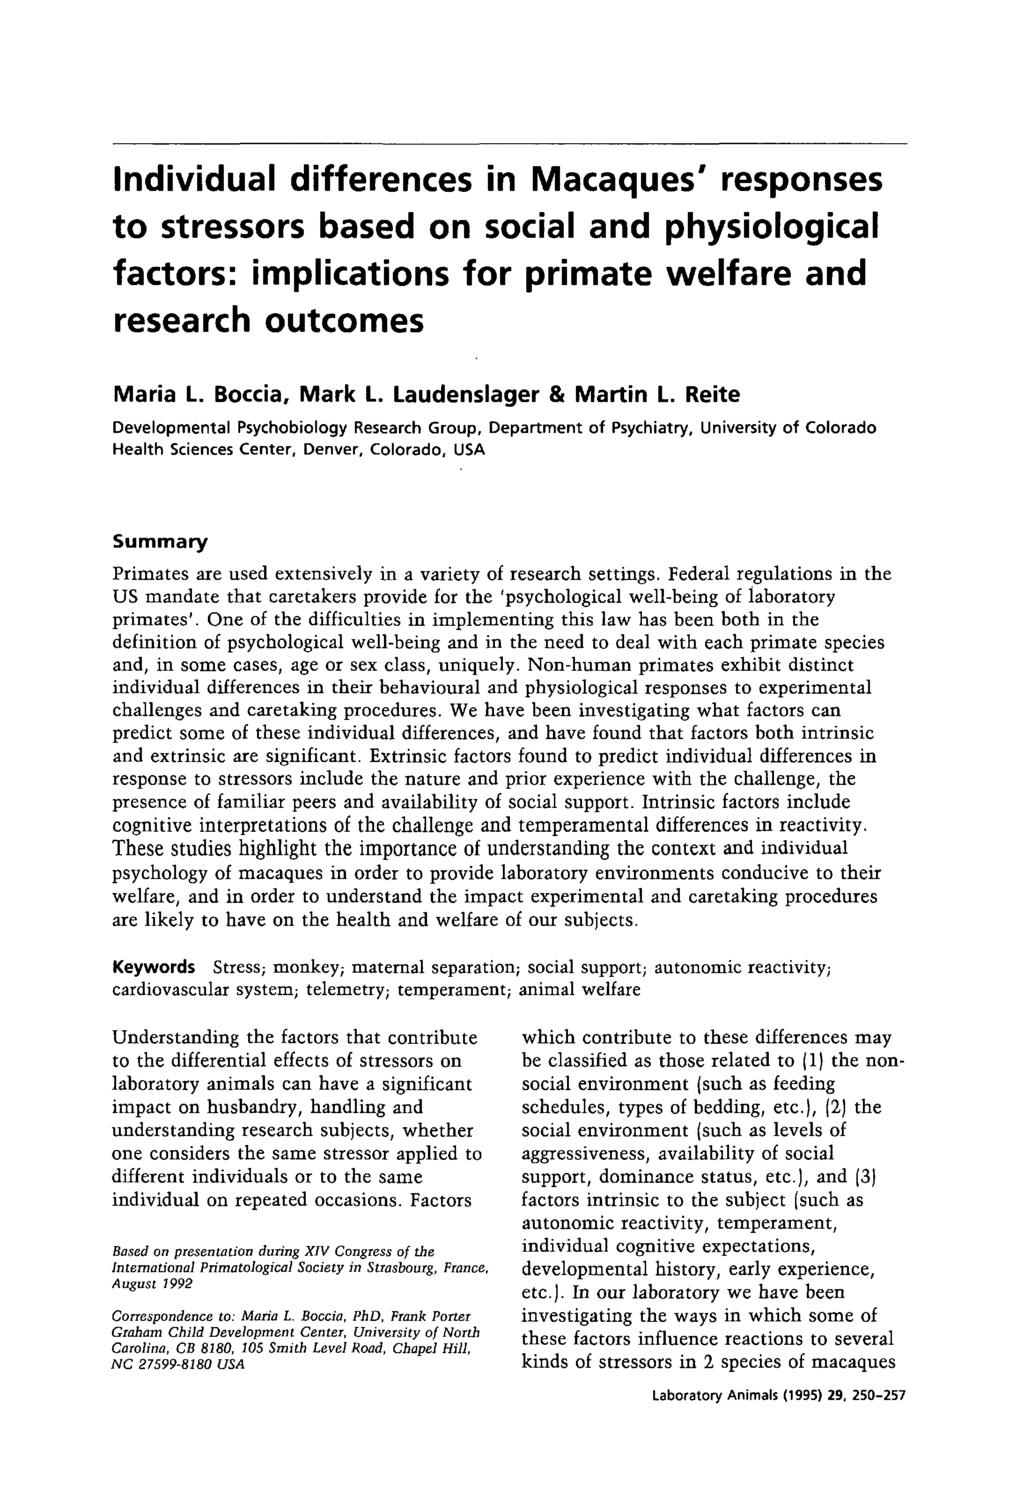 Individual differences in Macaques' respnses t stressrs based n scial and physilgical factrs: implicatins fr primate welfare and research utcmes Maria l. Bccia, Mark l. Laudenslager & Martin l.